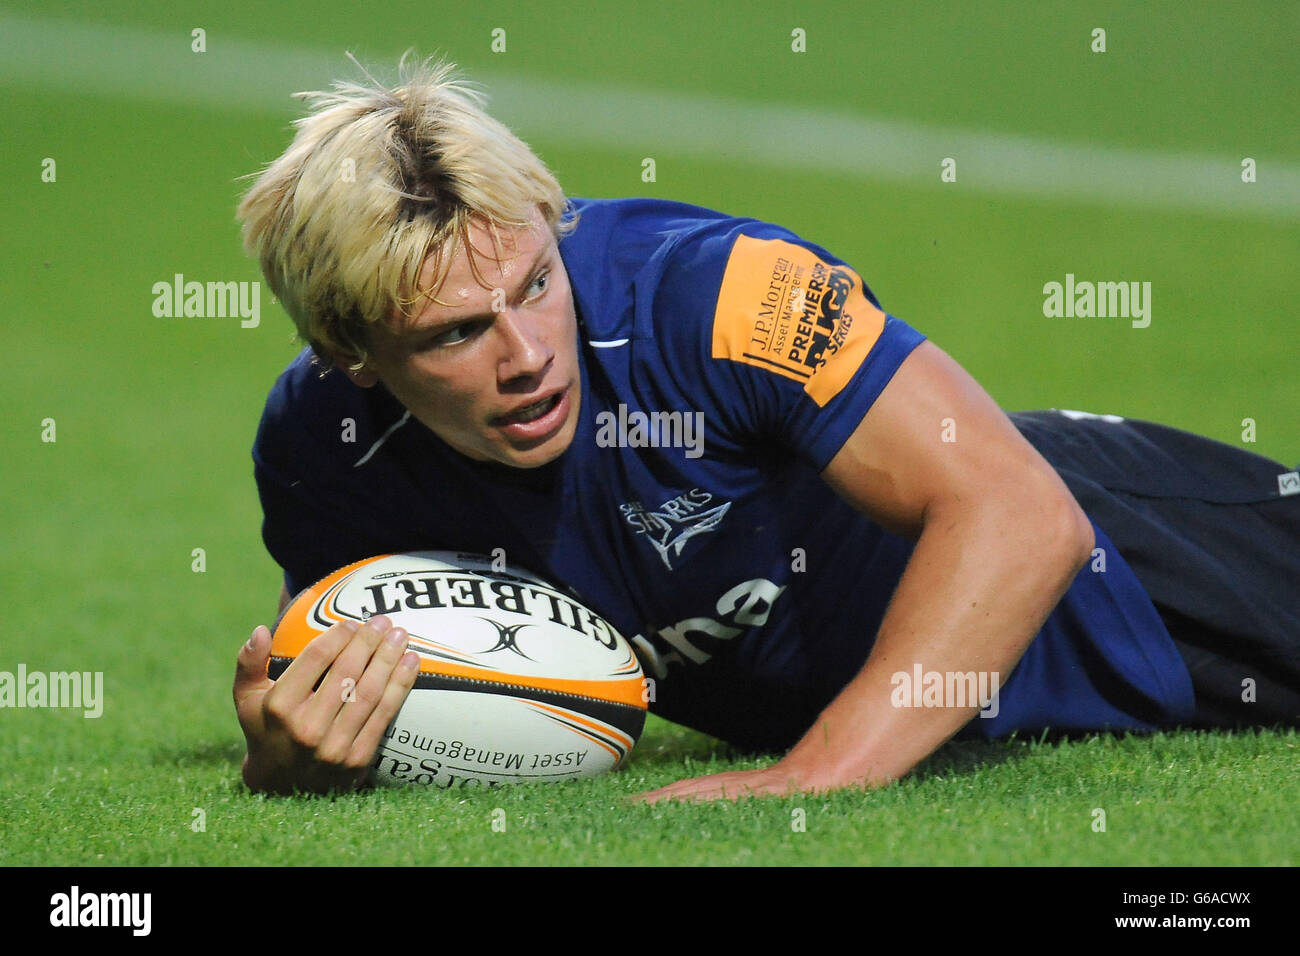 Sale Sharks 7s Nathan Fowles dives in to score against Northampton Saints 7s during the Group B match of the J.P. Morgan Asset Management Premiership Rugby 7's at Franklin's Gardens, Northampton. Stock Photo